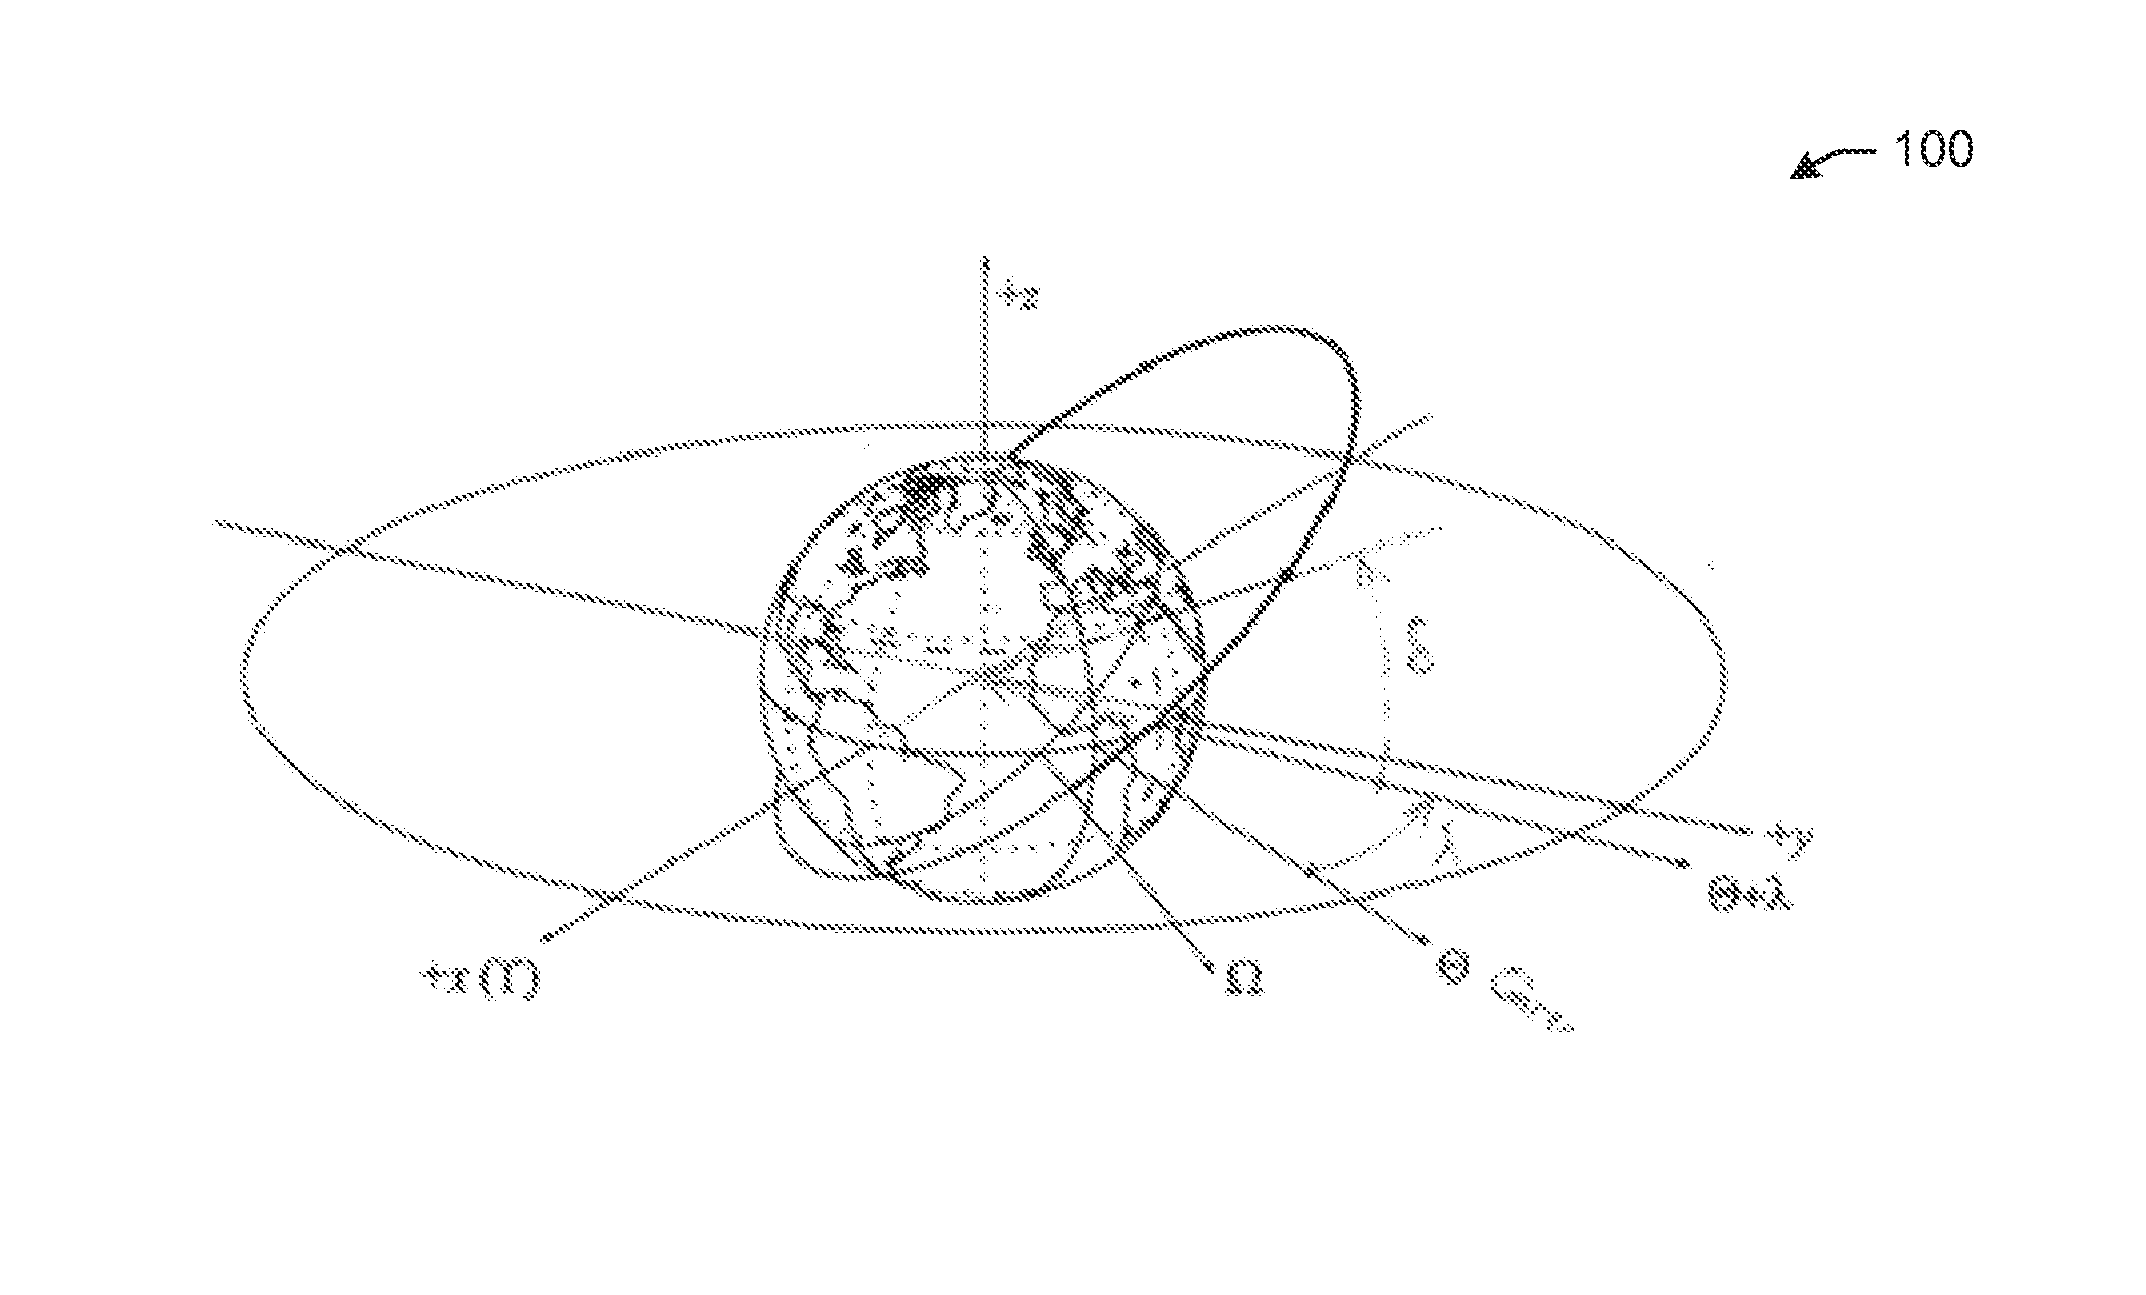 Systems and Methods for Optimizing Satellite Constellation Deployment